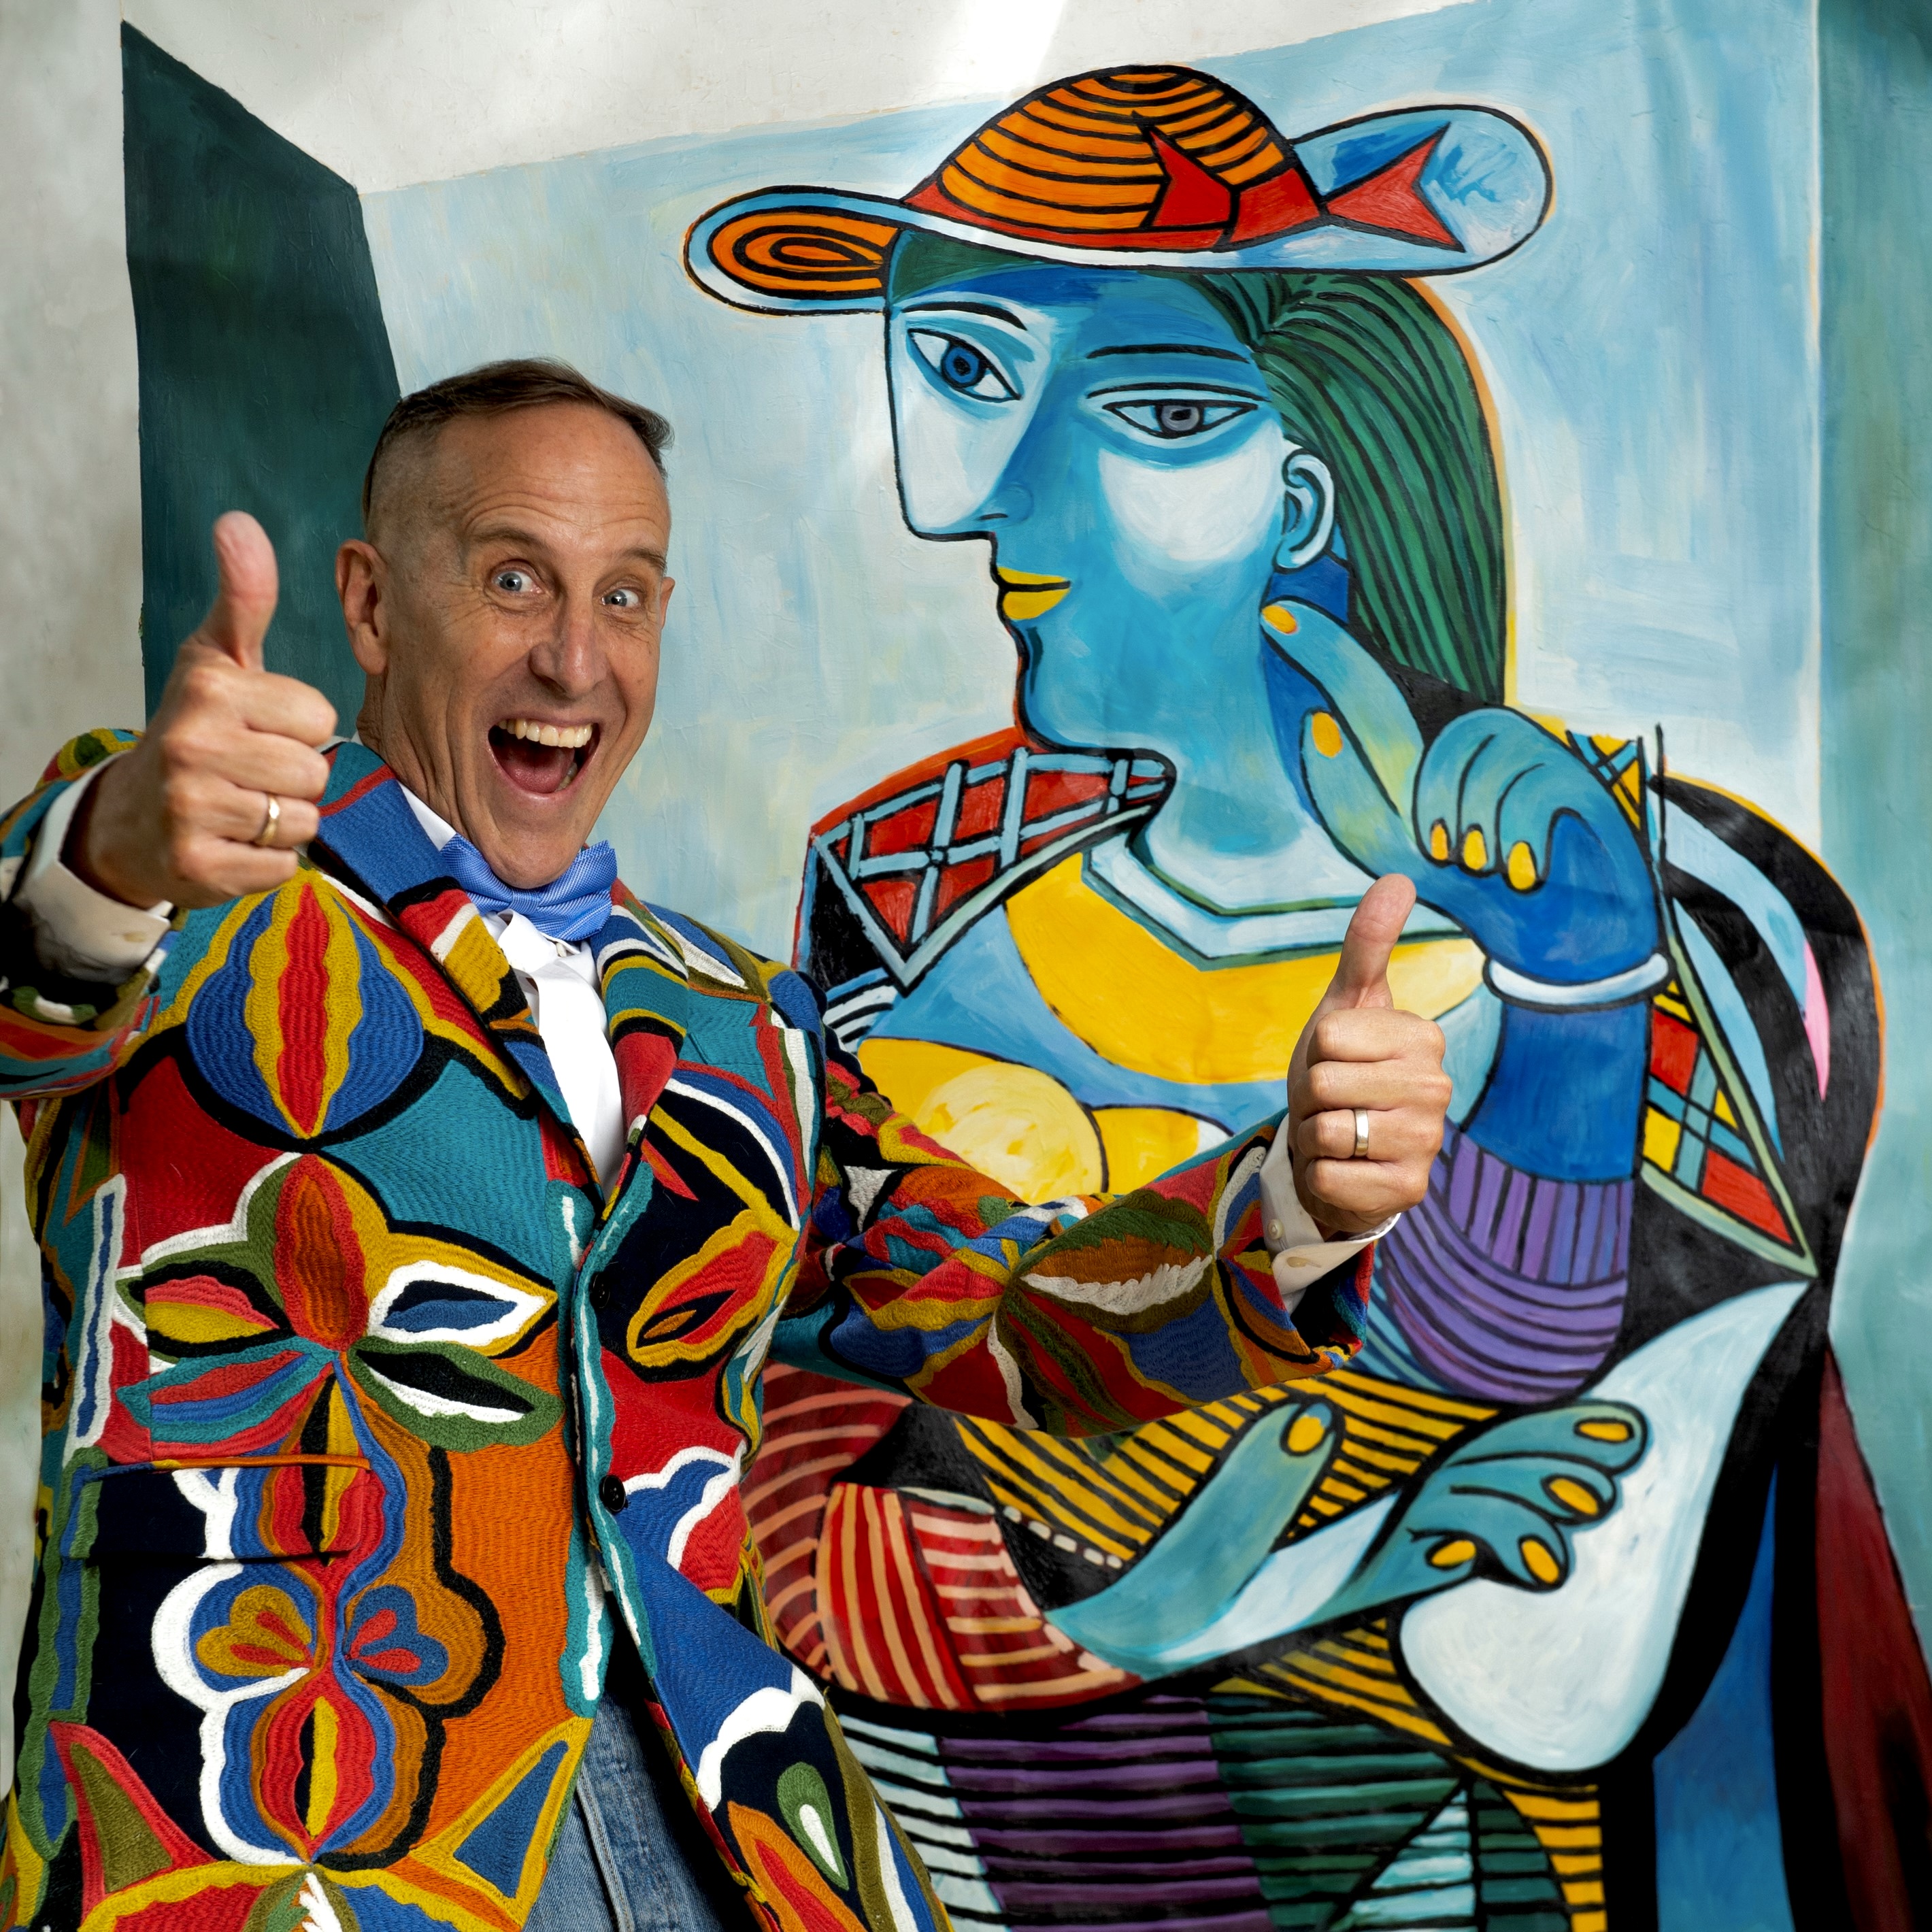 The Whimsical World of Bill Bensley: Designing With a Purpose